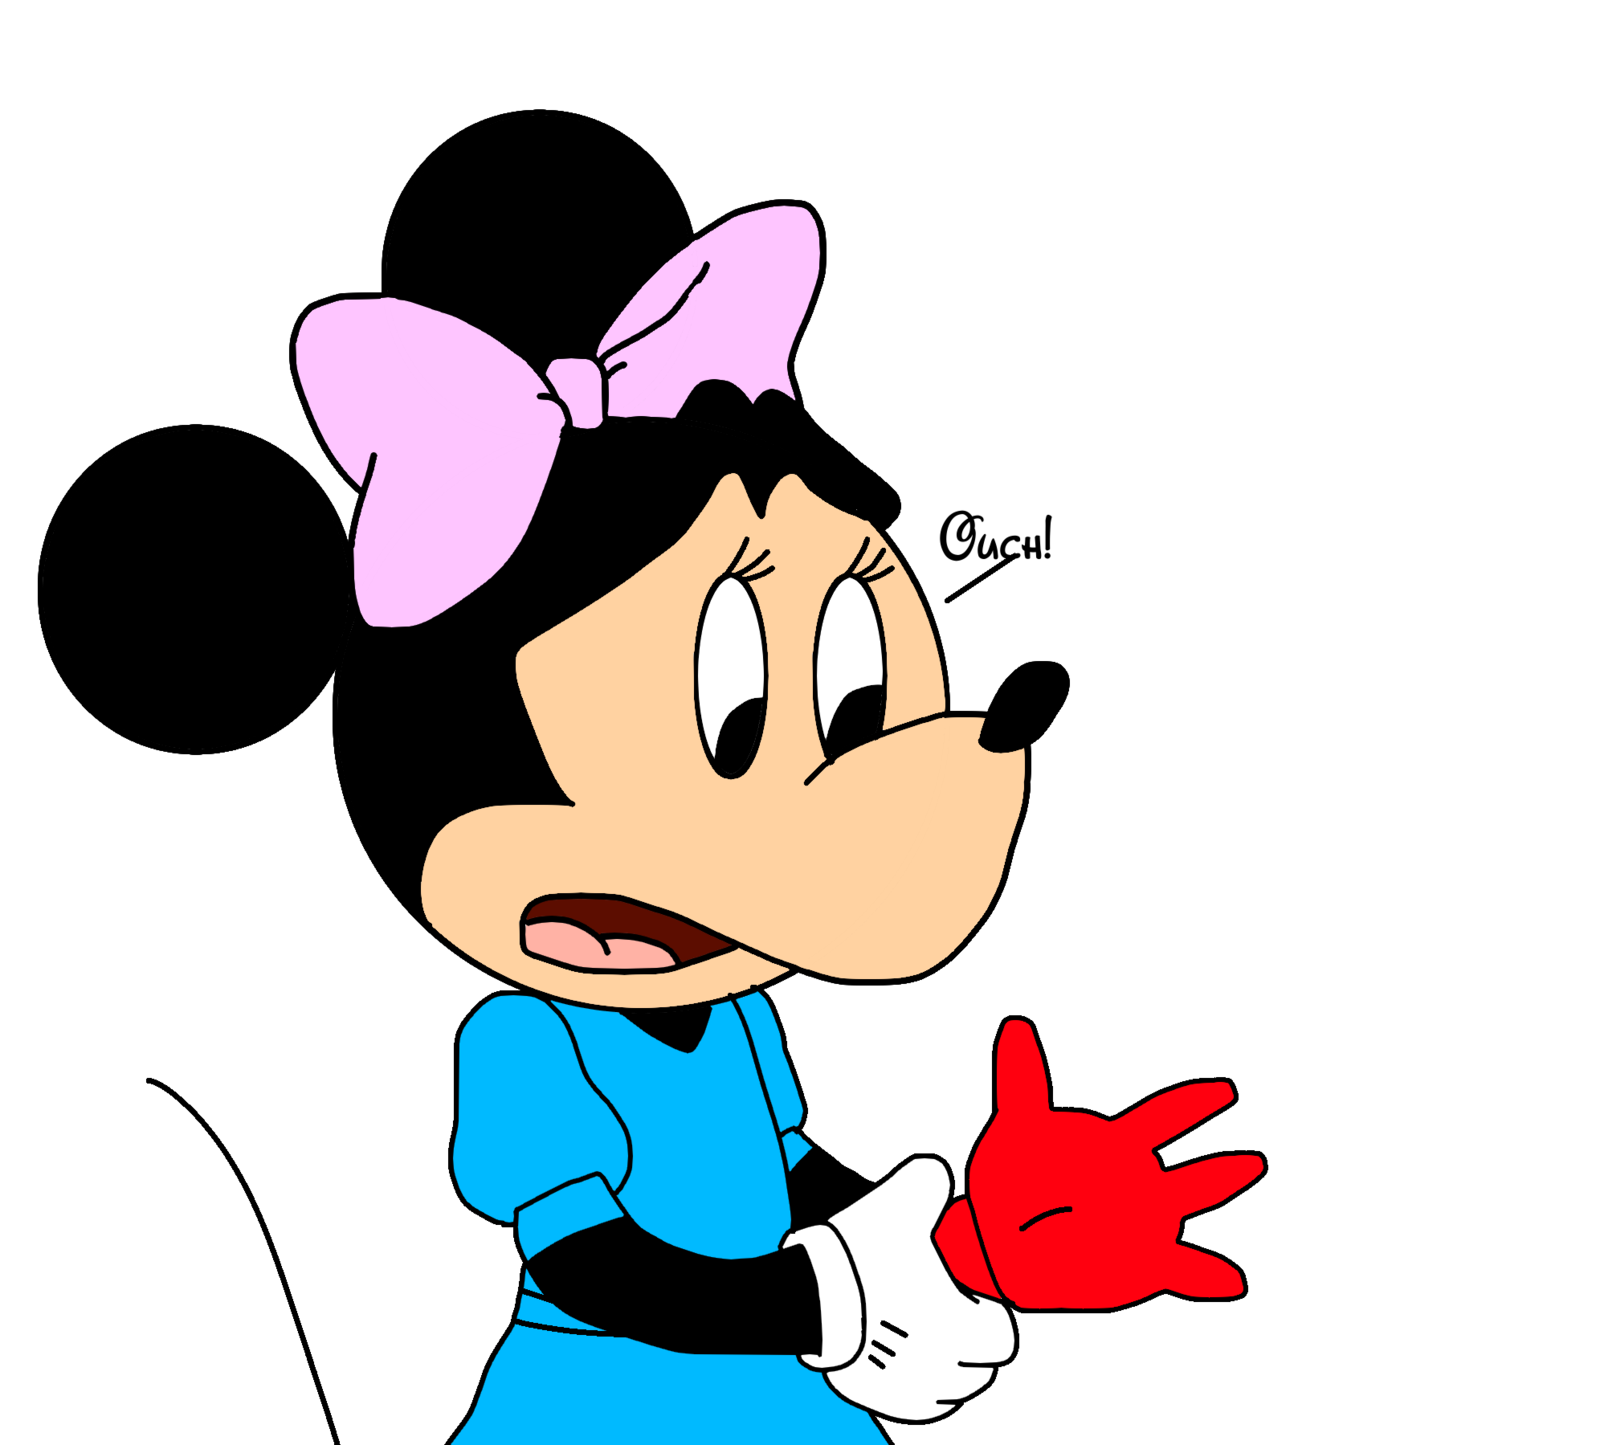 With her hand hurt. Hands clipart minnie mouse